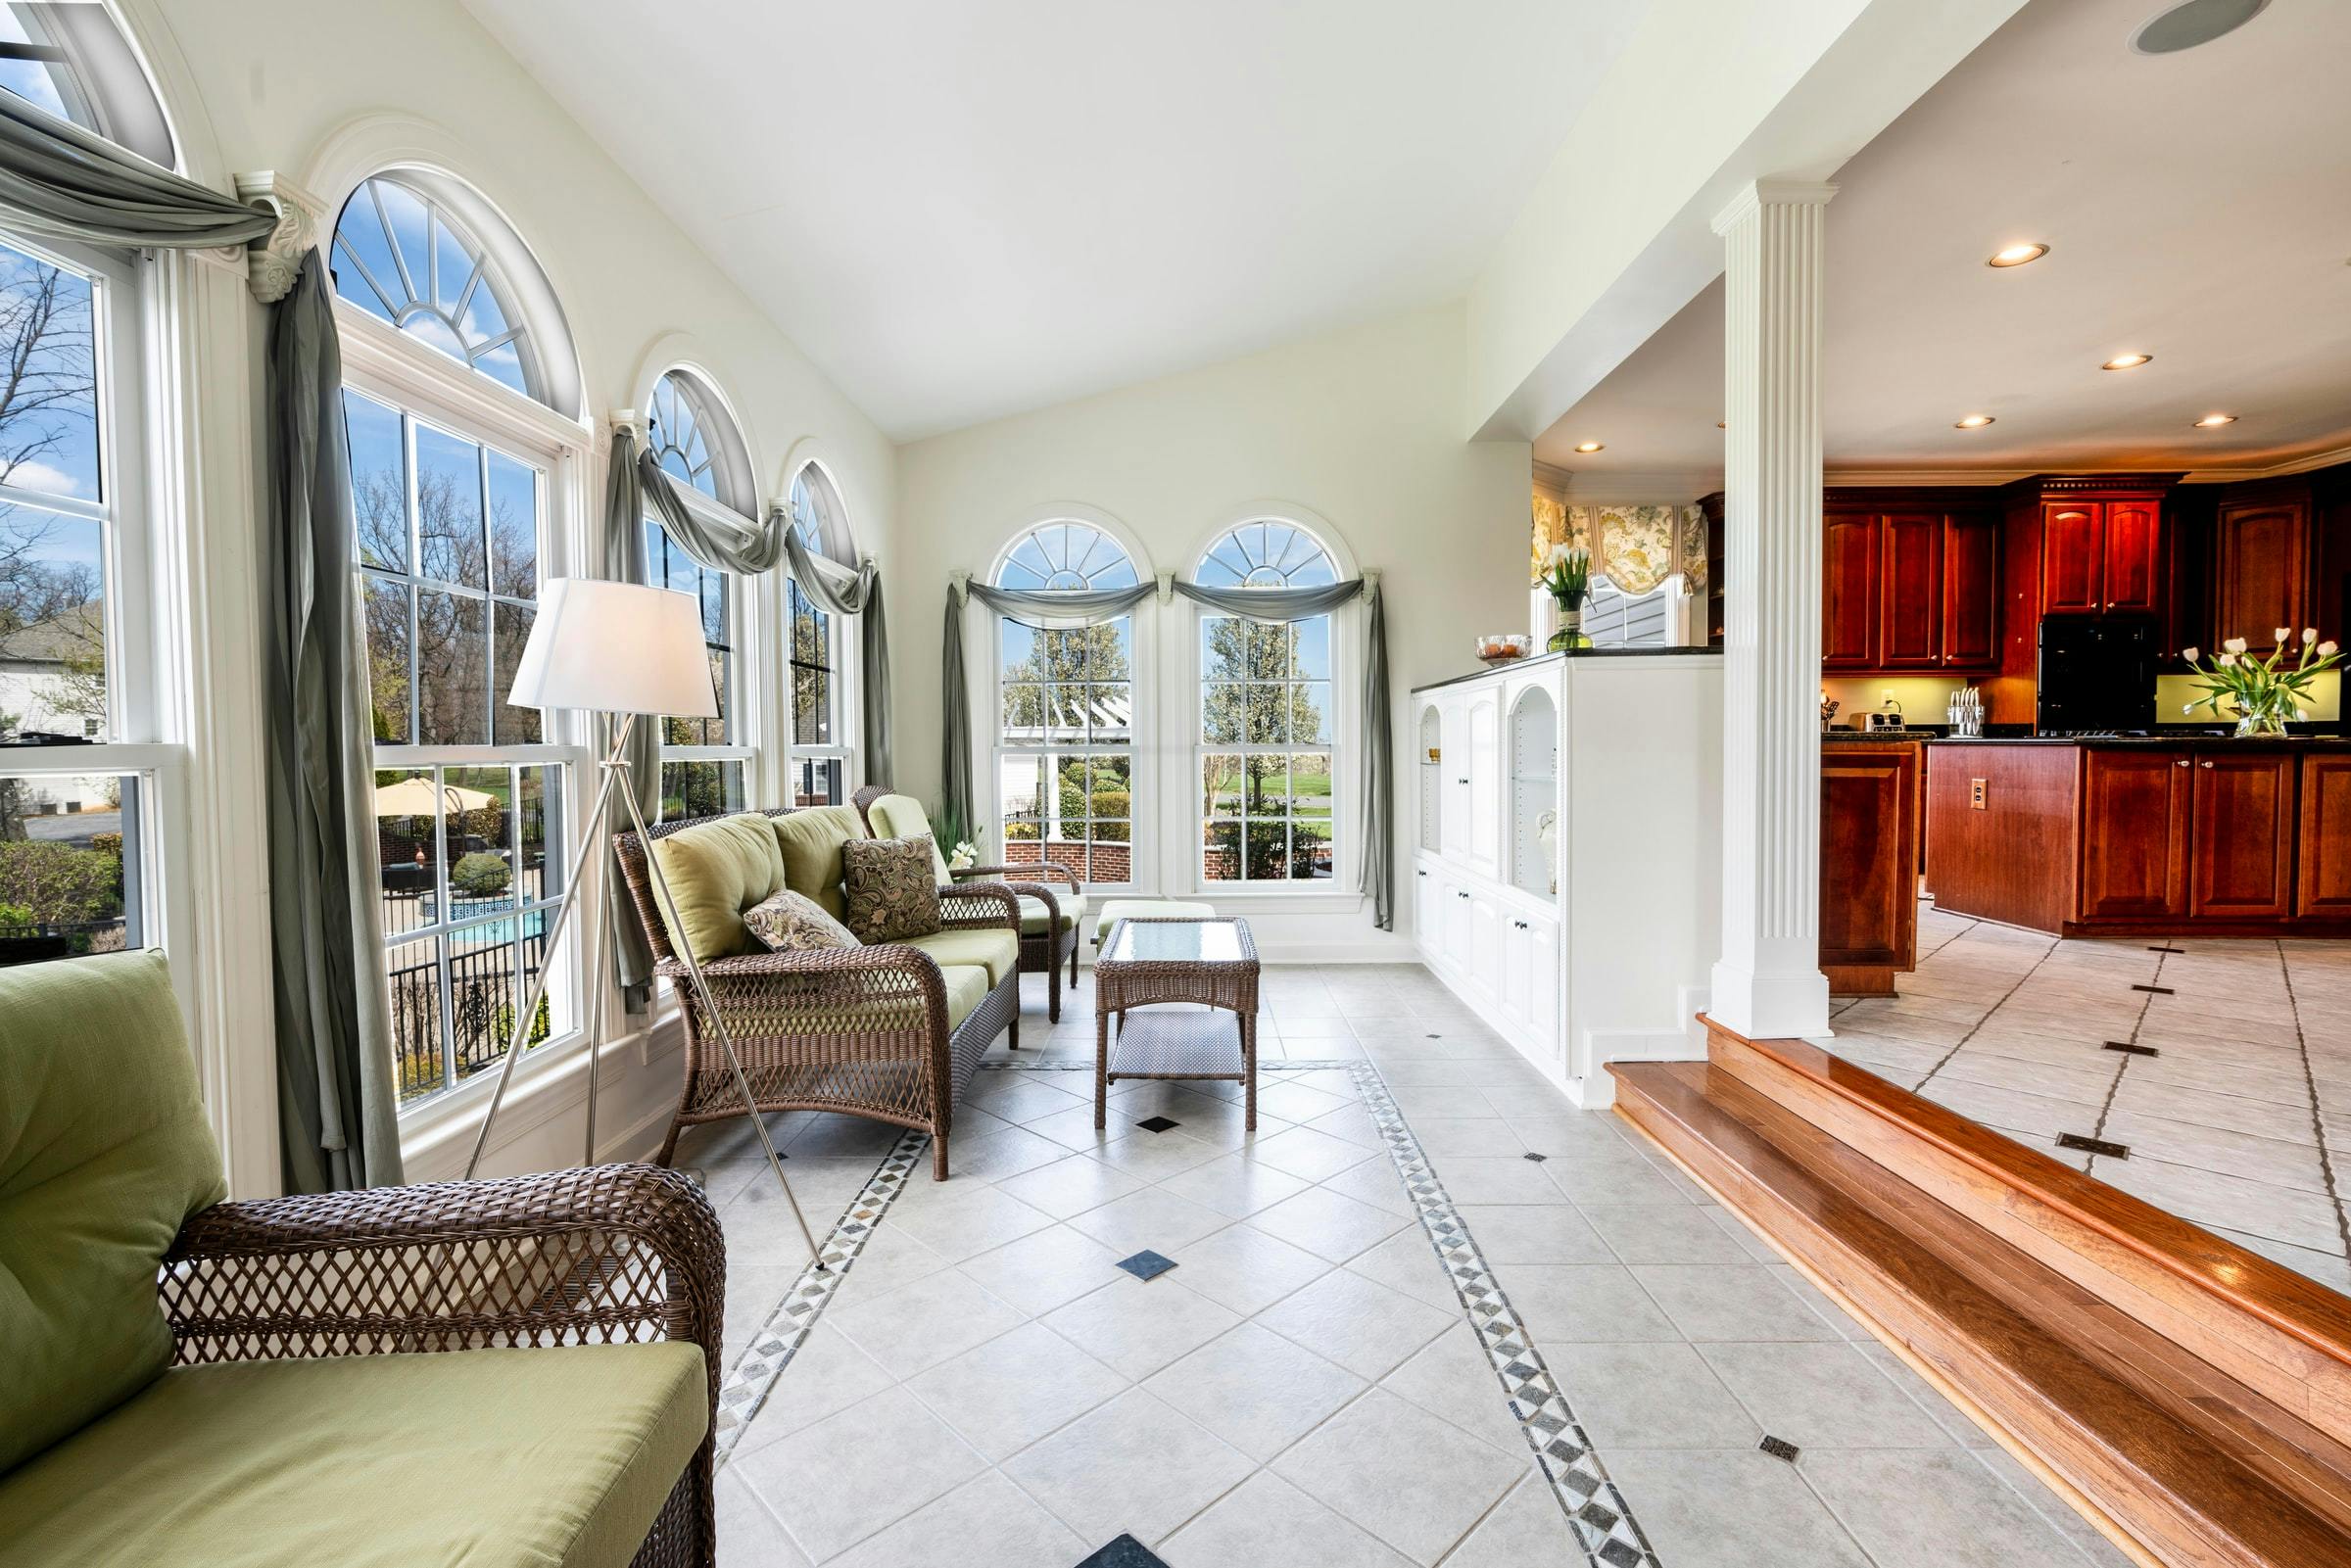 7 Pro Tips to Photograph Real Estate Interiors With Bright Windows